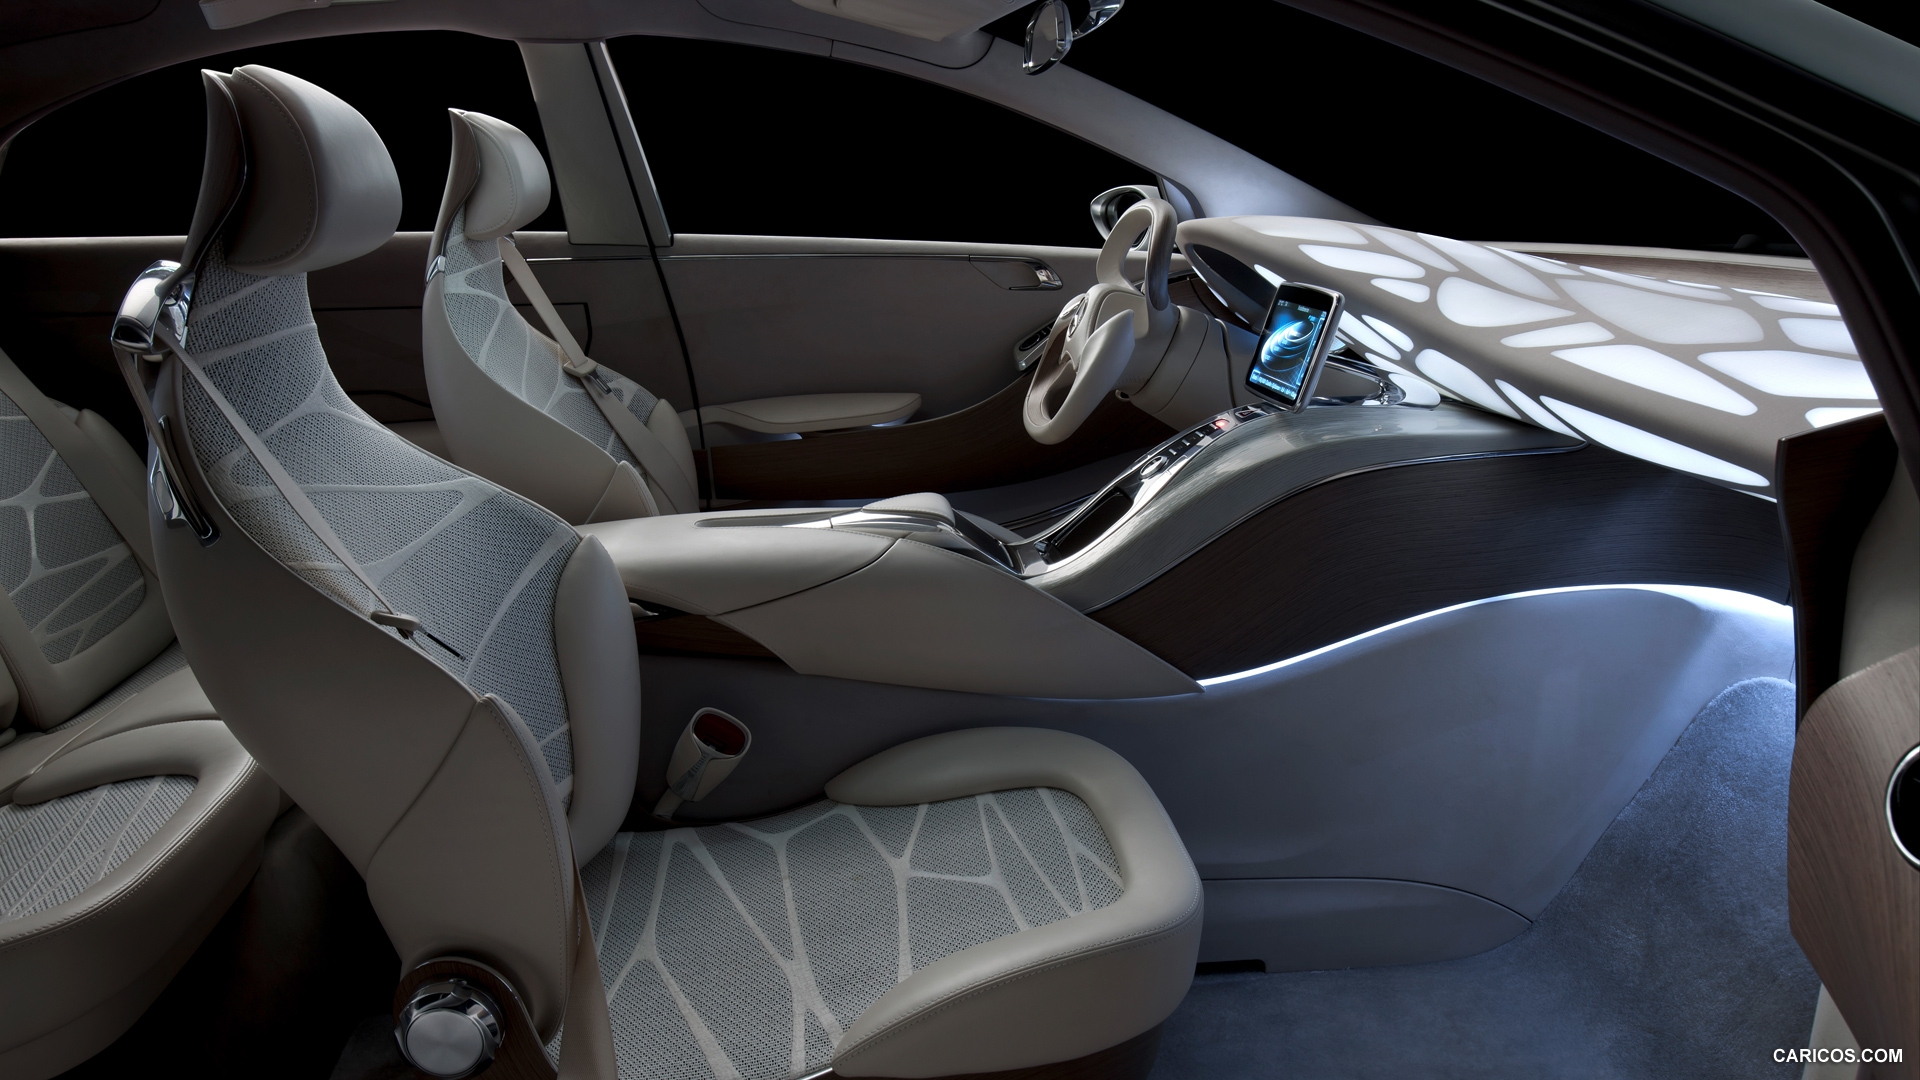 Mercedes-Benz F800 Style Concept (2010)  - Interior, Front Seats, #58 of 120